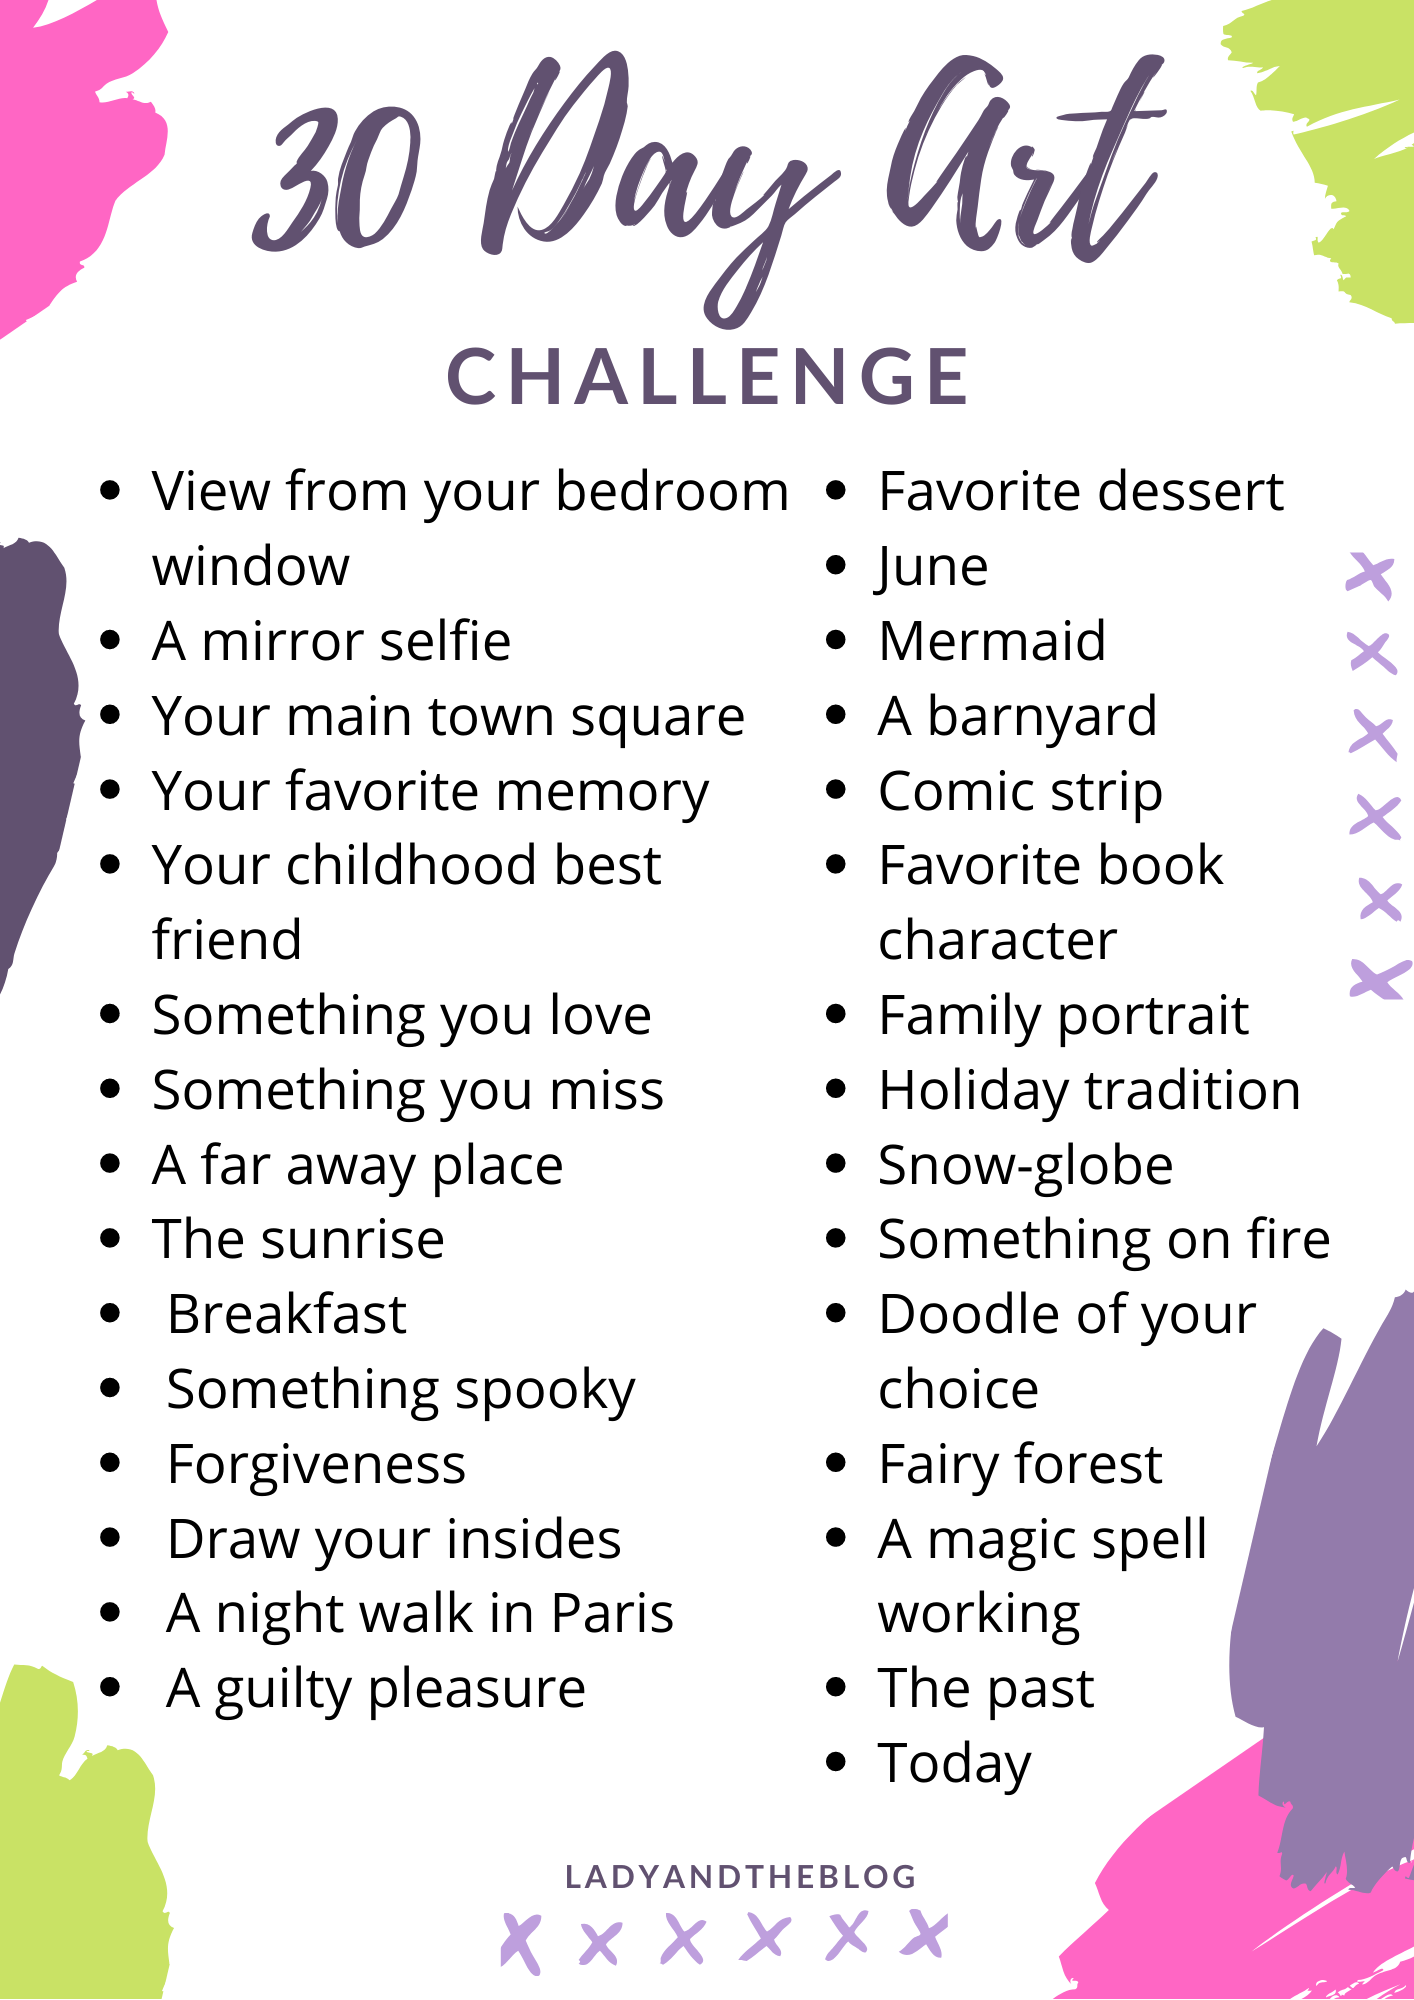 Take The 30 Day Drawing Challenge - Fun Daily Prompts Filled With